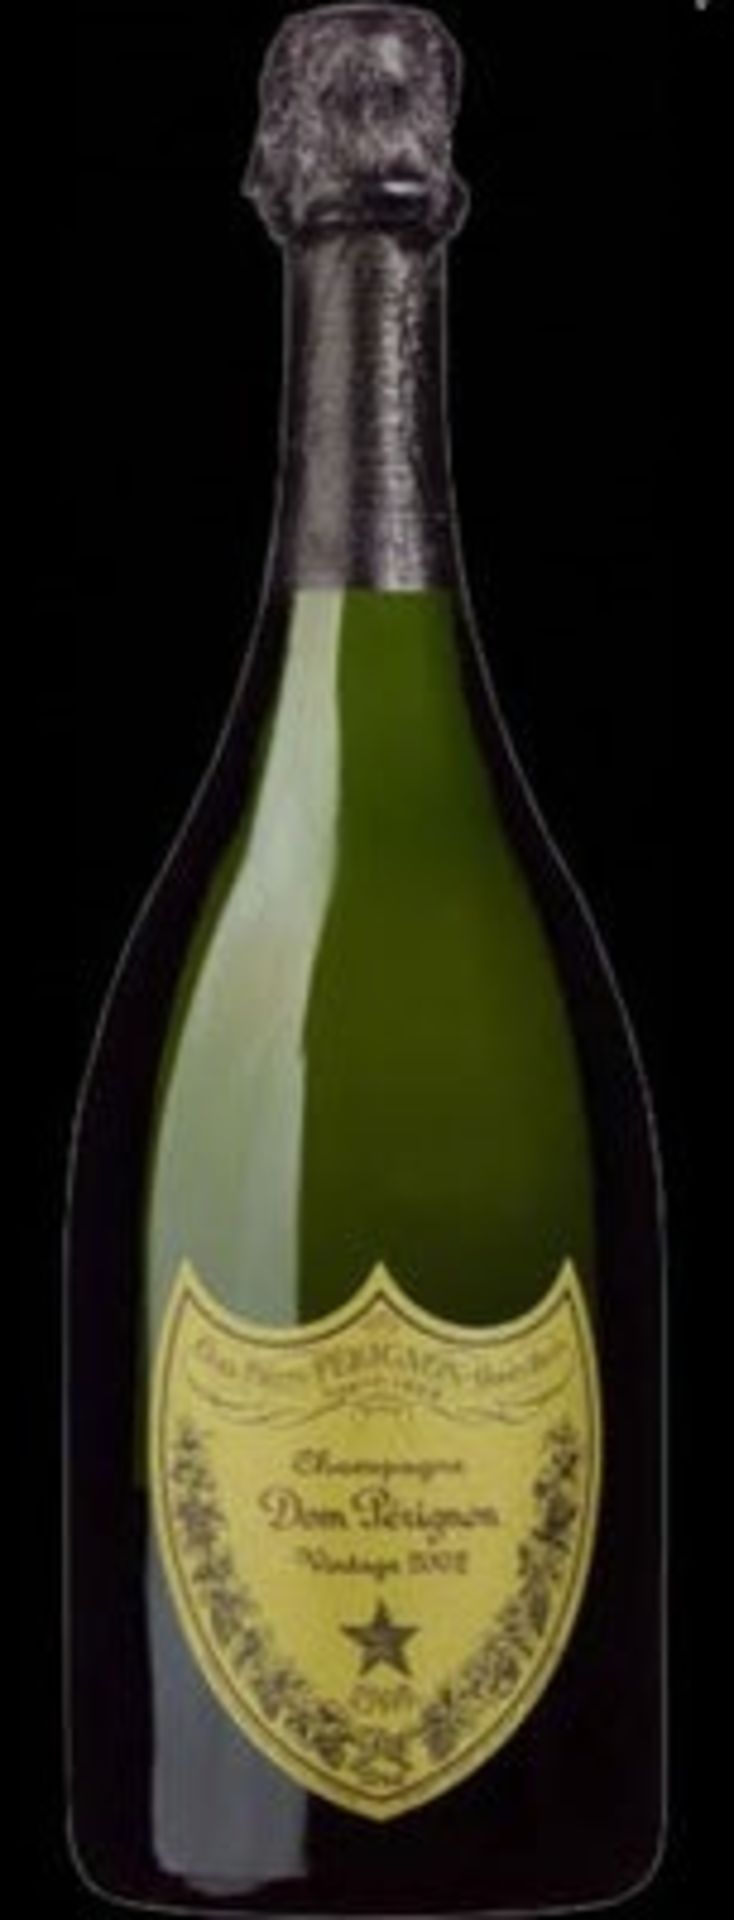 Dom Perignon 1998 Brut Champagne, 75 Cl ( Bid Is For 1x Bottle Option To Purchase More)